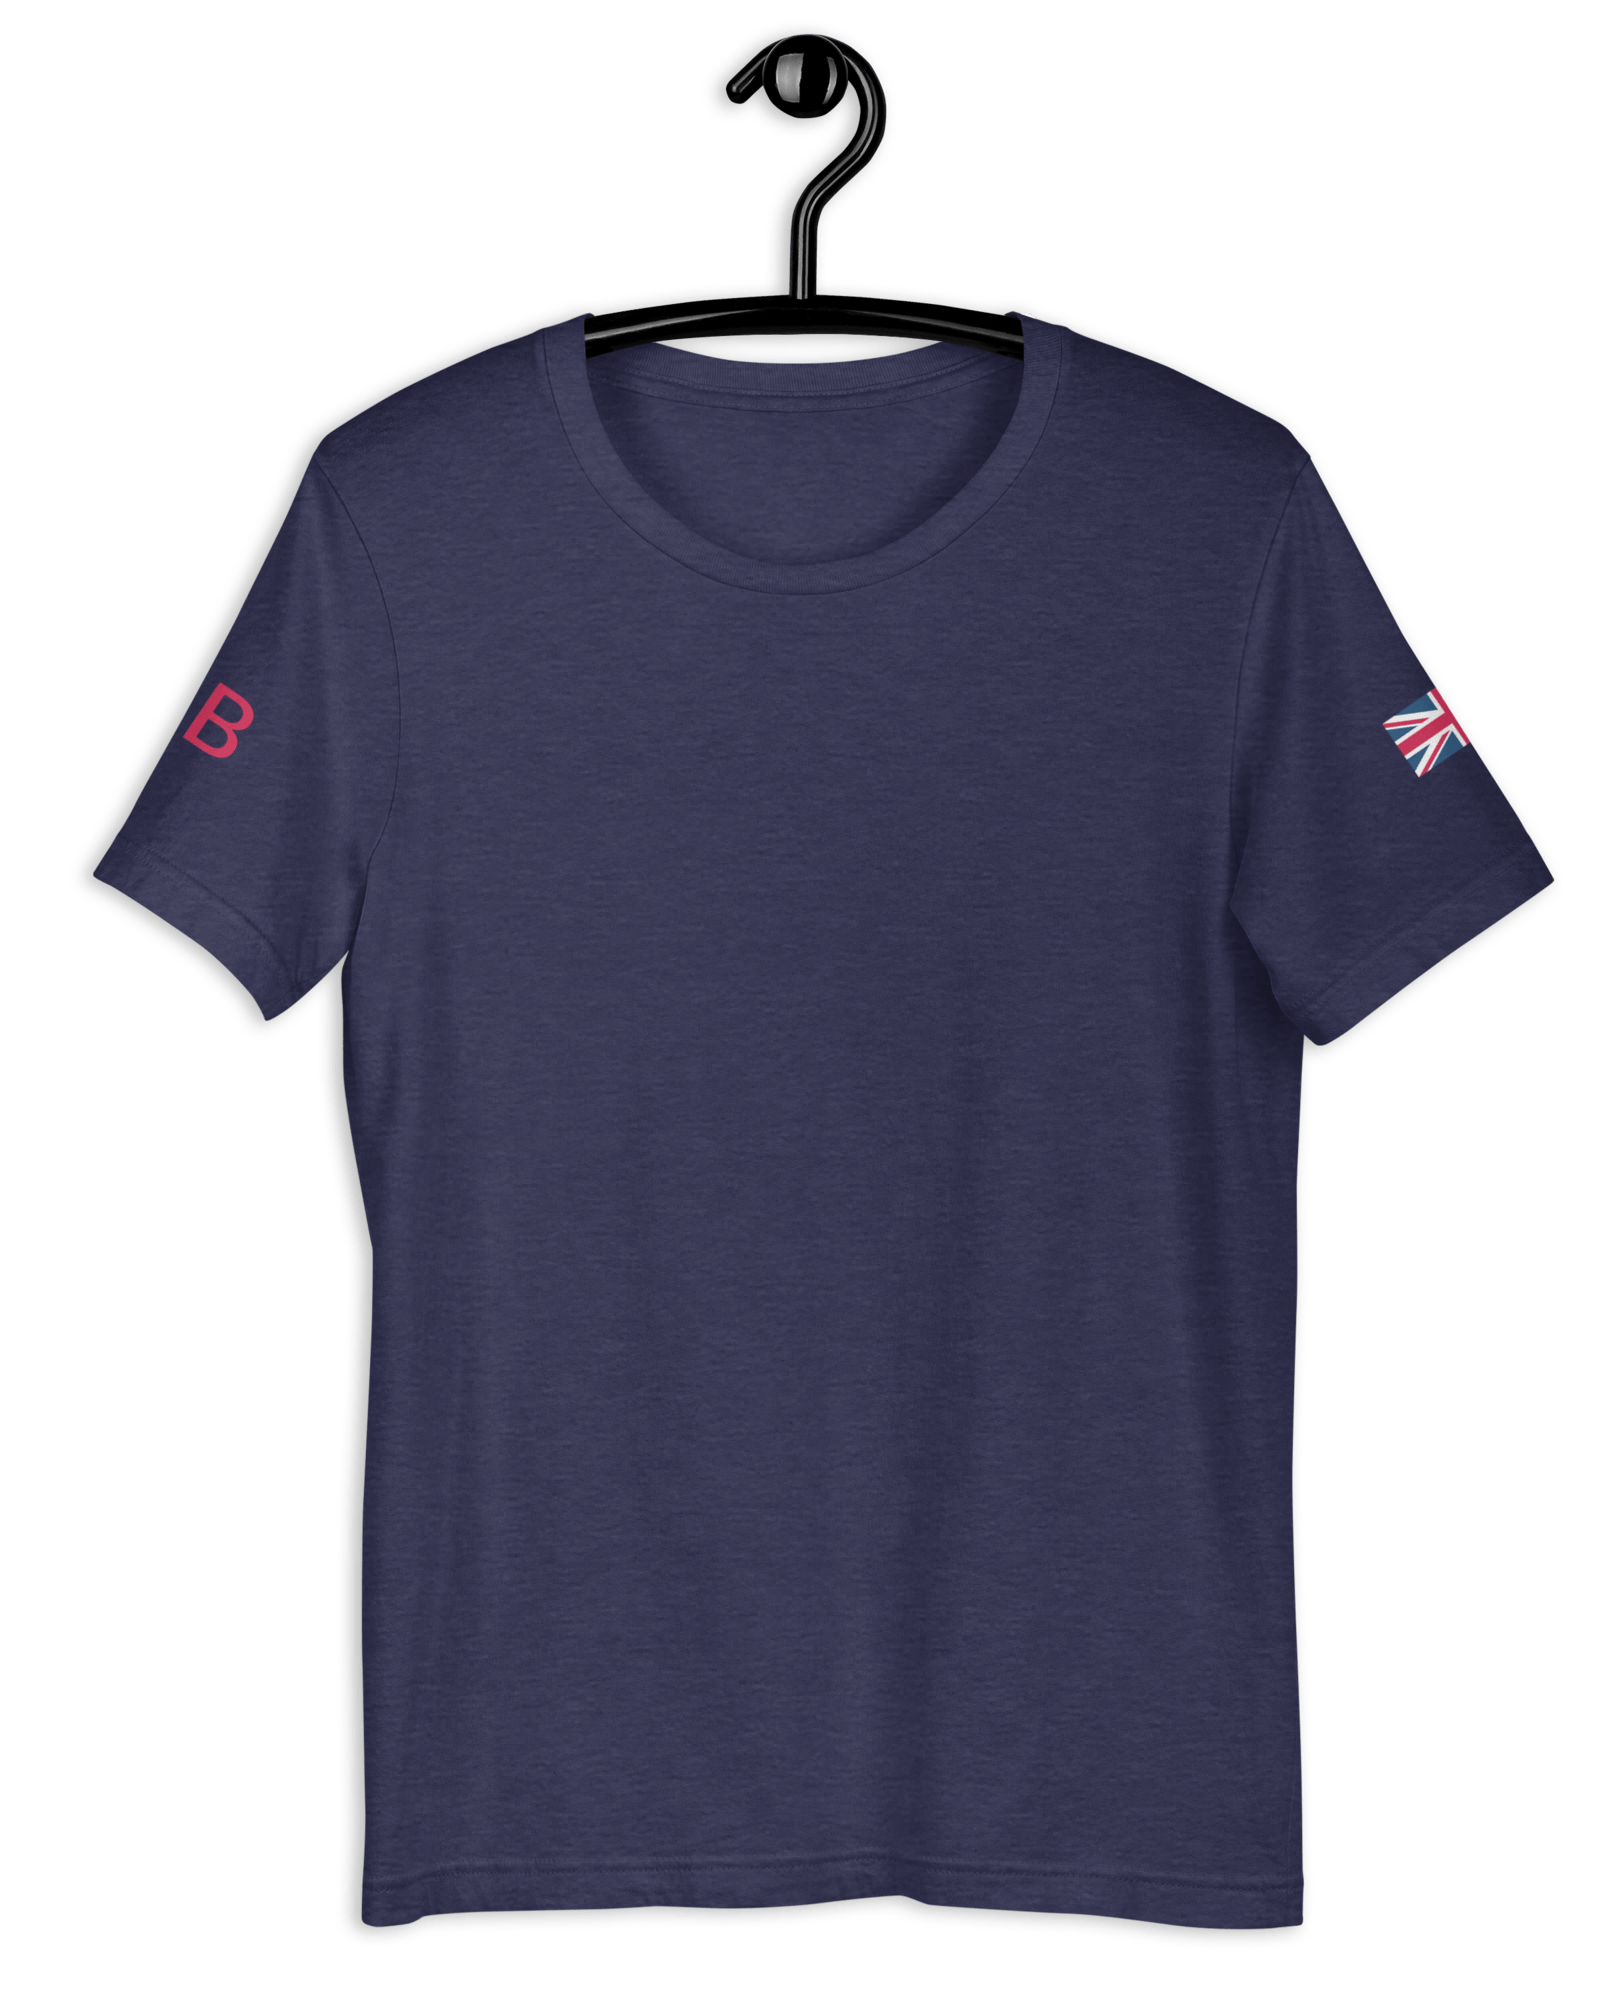 Union Jack GB T-shirt | Both Sleeves | Unisex Fit Heather Midnight Navy / XS Shirts & Tops Jolly & Goode